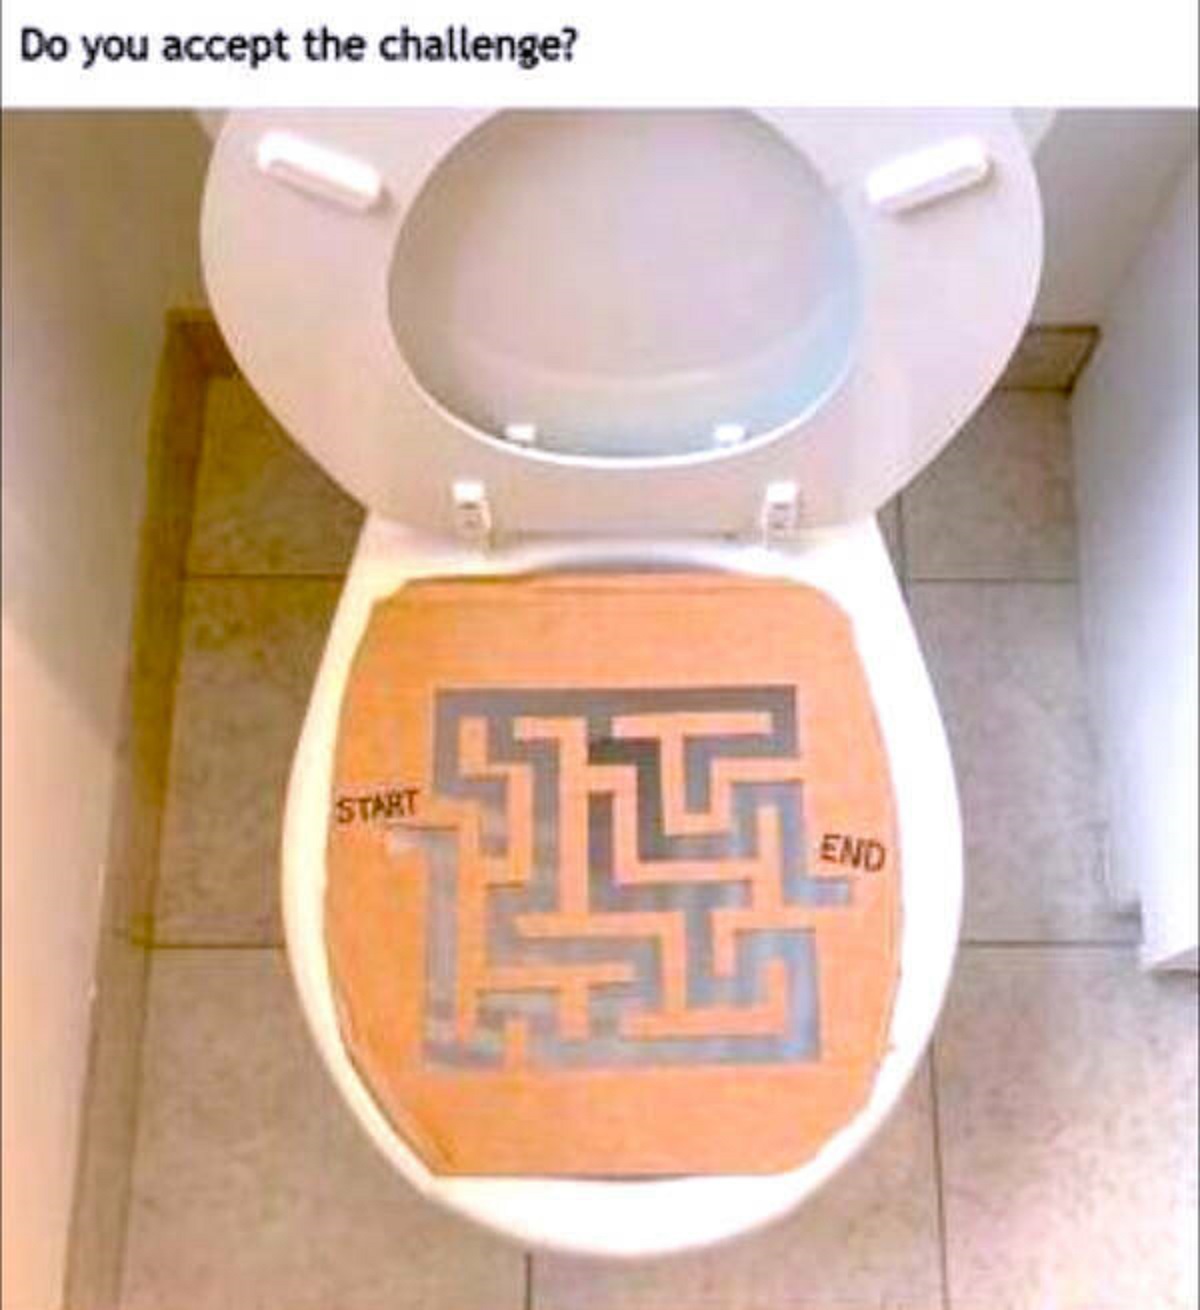 toilet seat - Do you accept the challenge? Start 14 End